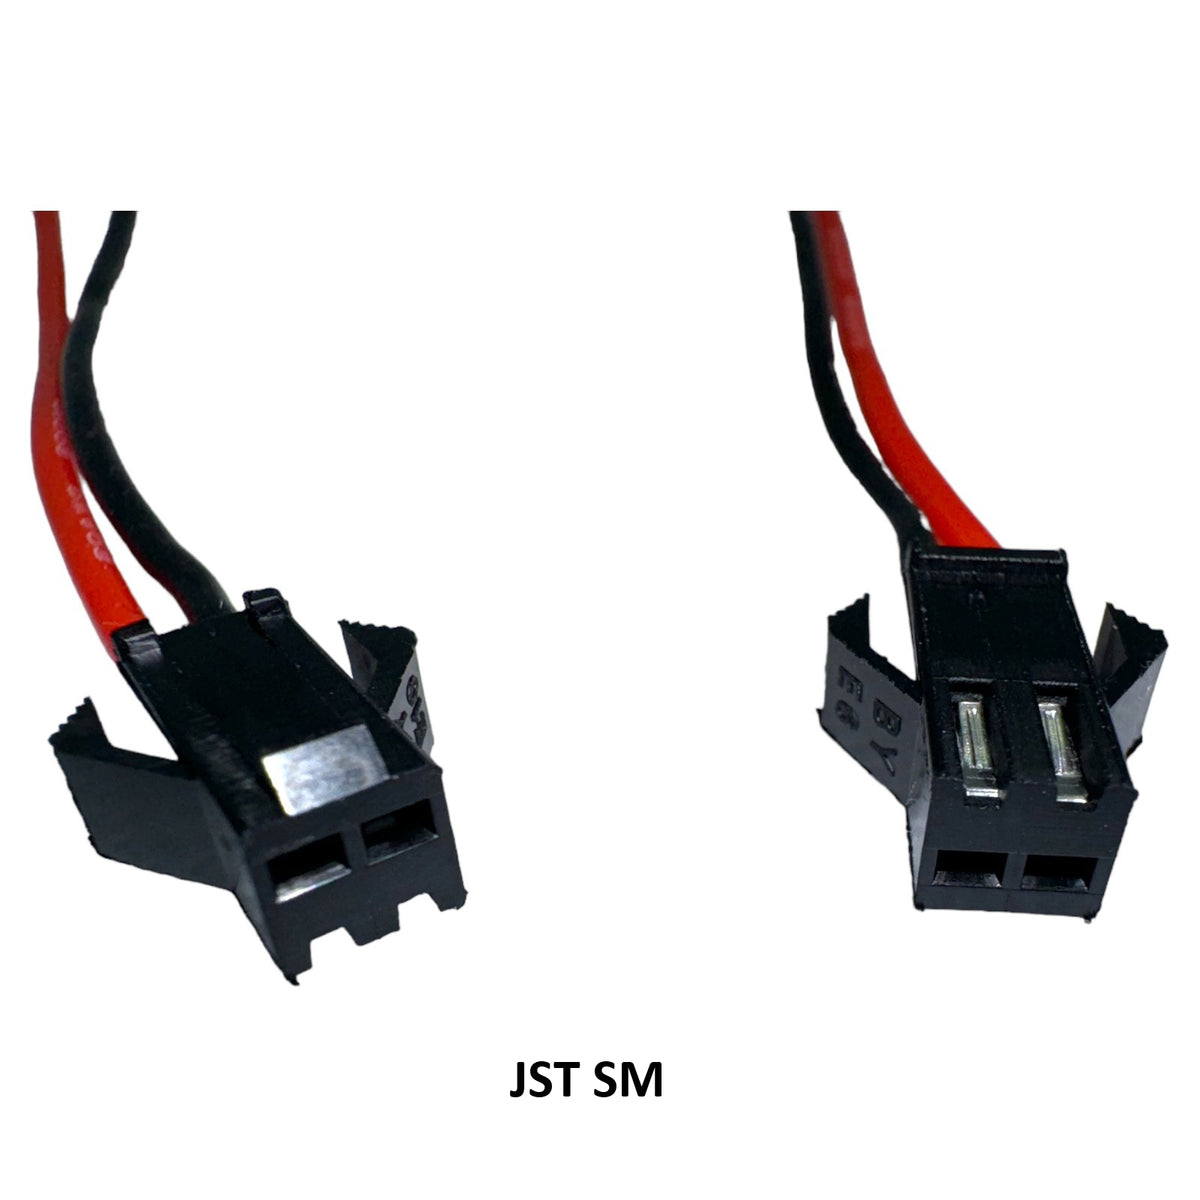 1S 3.7V 3400mAh Li-ion battery with JST SM 2pin connector